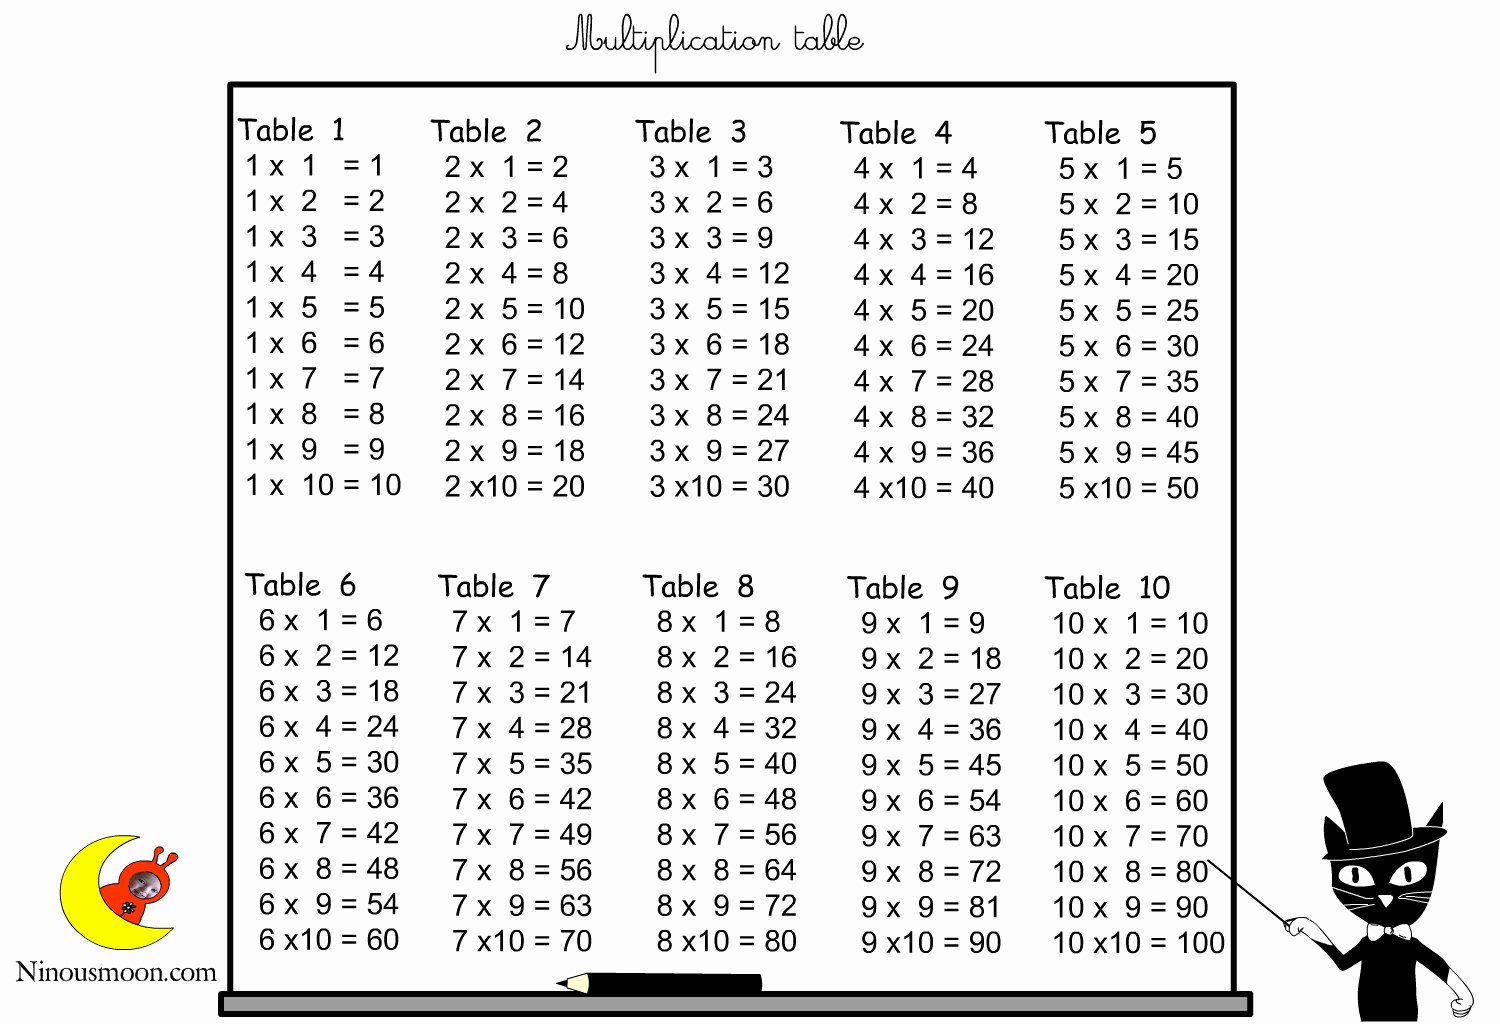 Free Printable Times Tables Awesome 40 Tables 1 to 20 for Kids Multiplication Tables Http